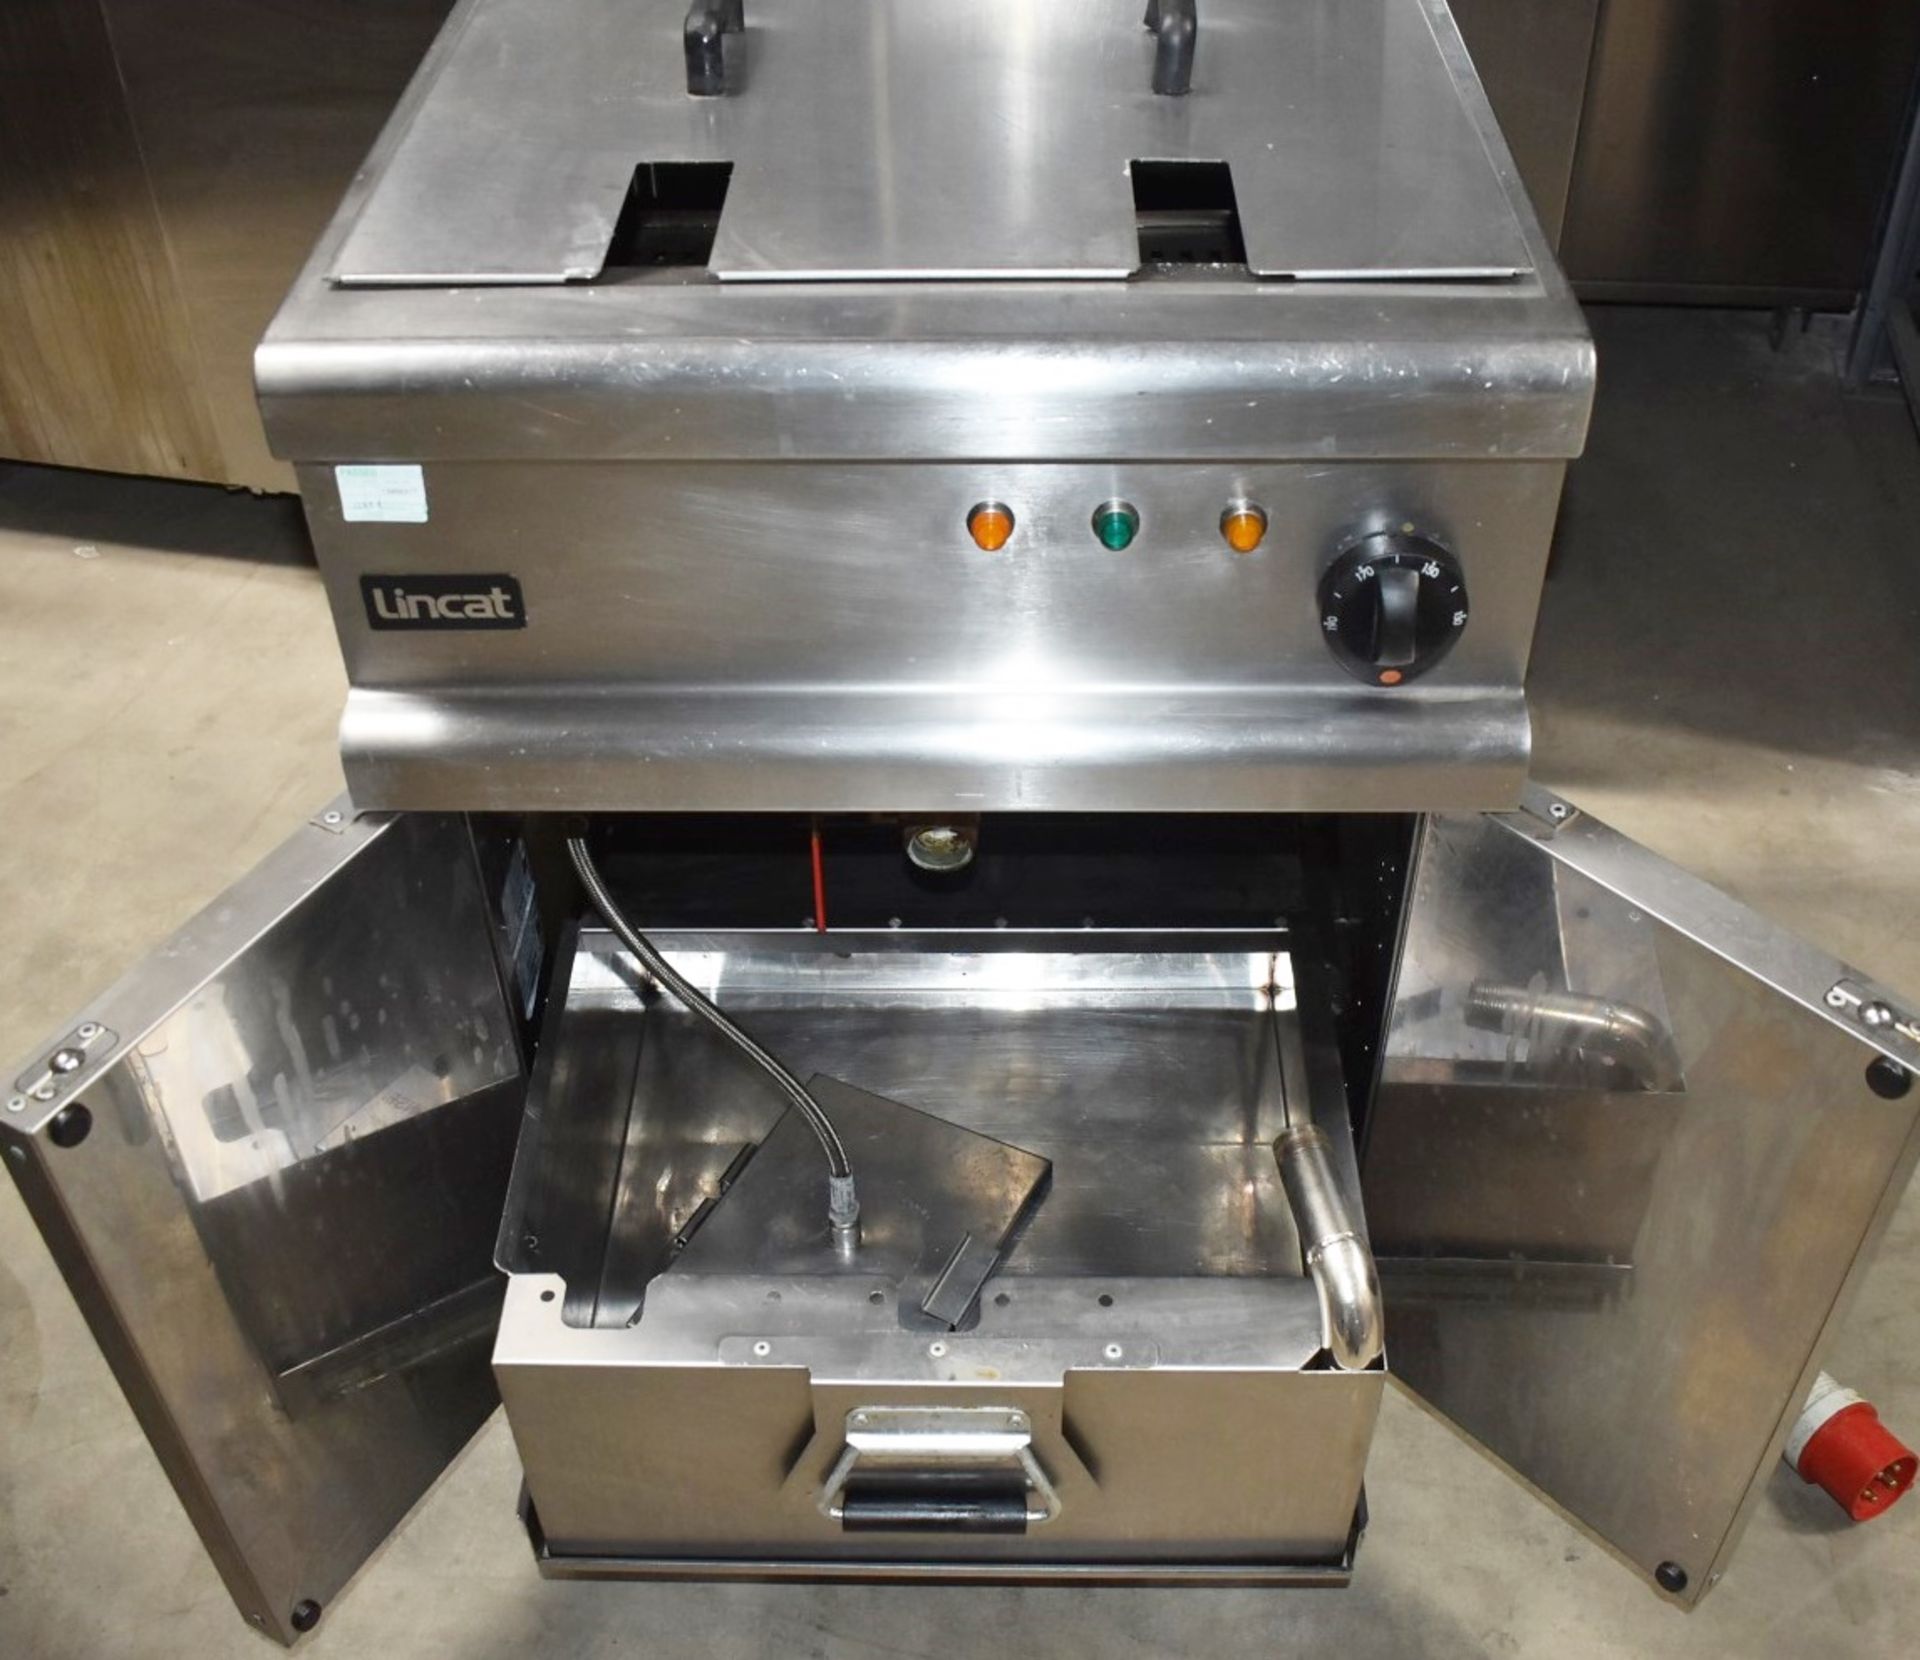 1 x Lincat Opus 700 Single Tank Electric Fryer With Built In Filtration - 3 Phase - Image 9 of 19